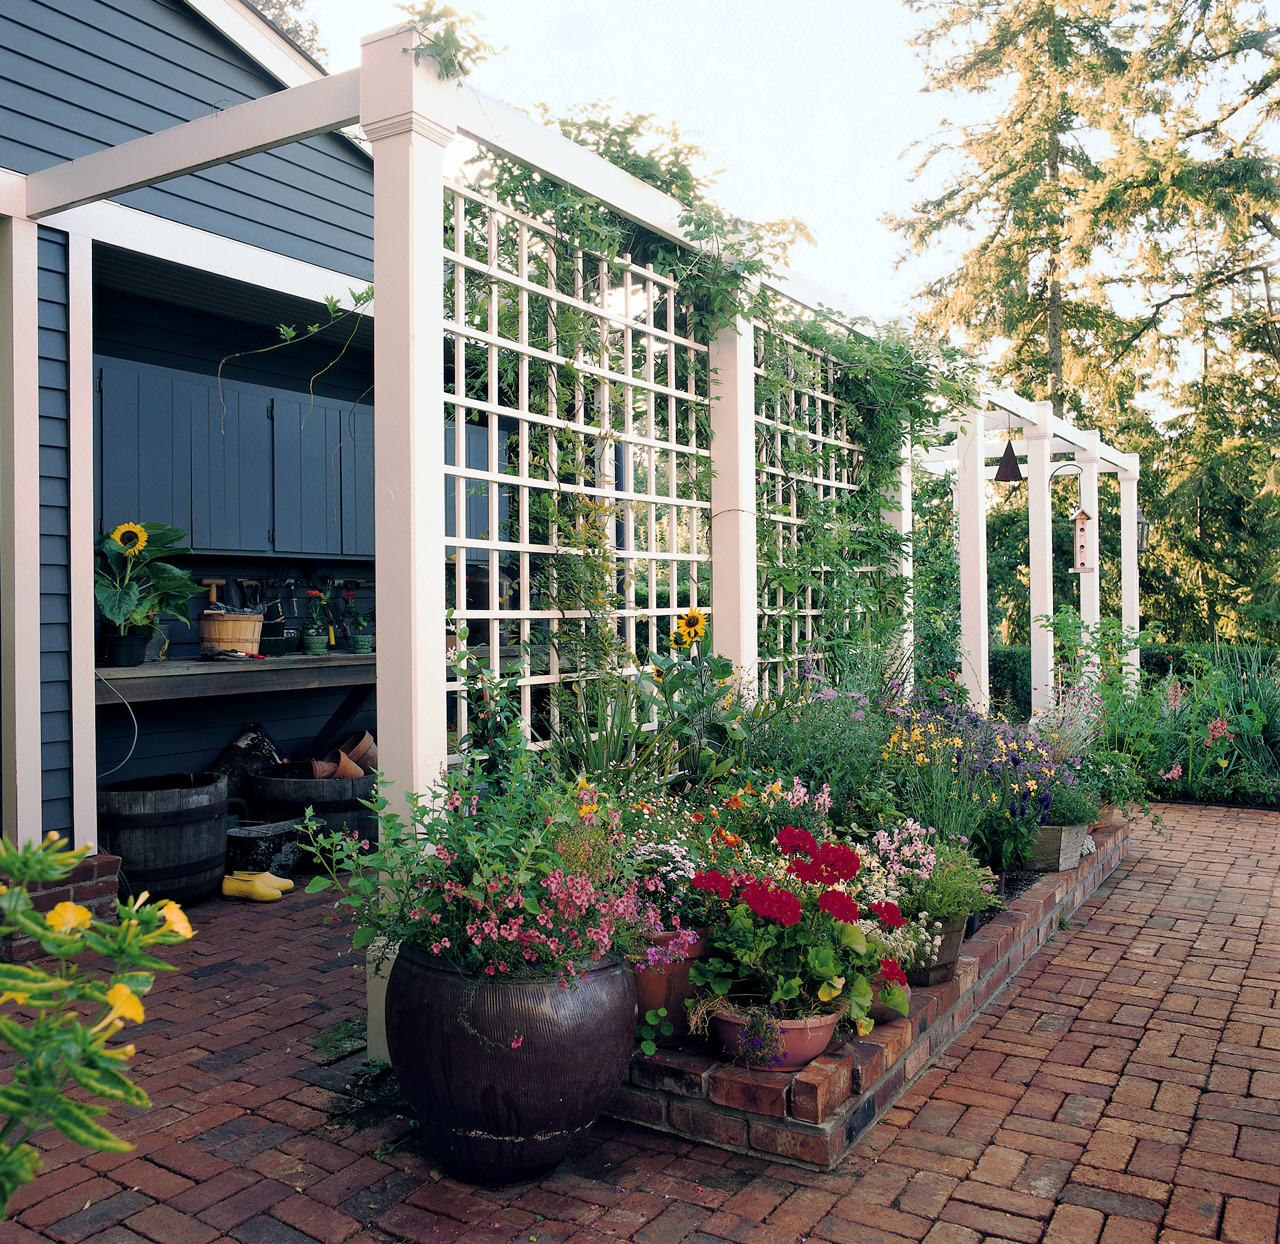 Workspace trellis screen for privacy